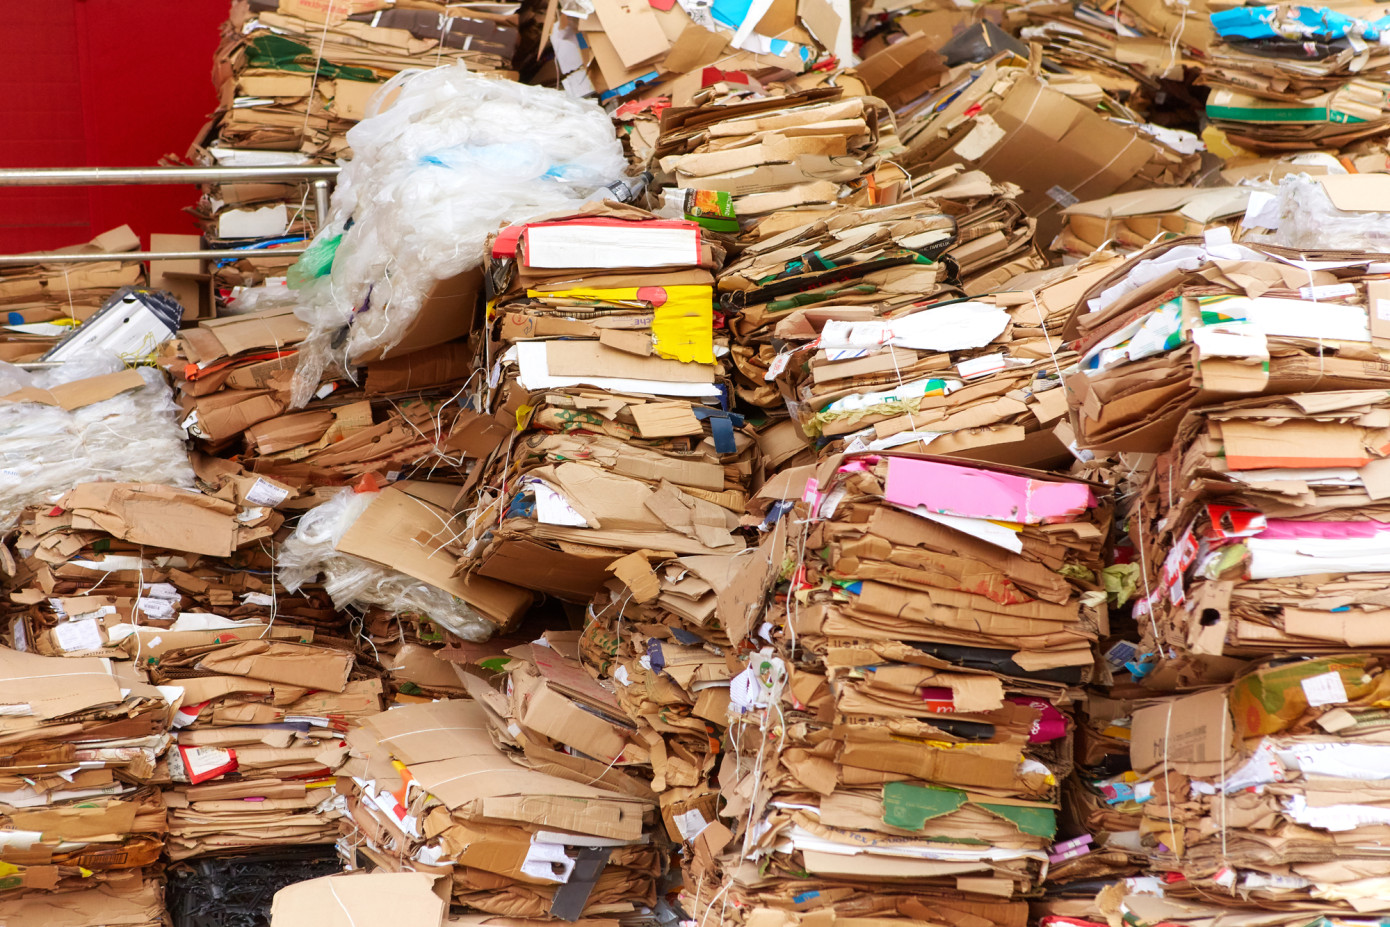 Surge in demand for recycled cardboard elevates prices for old corrugated containers in U.S.